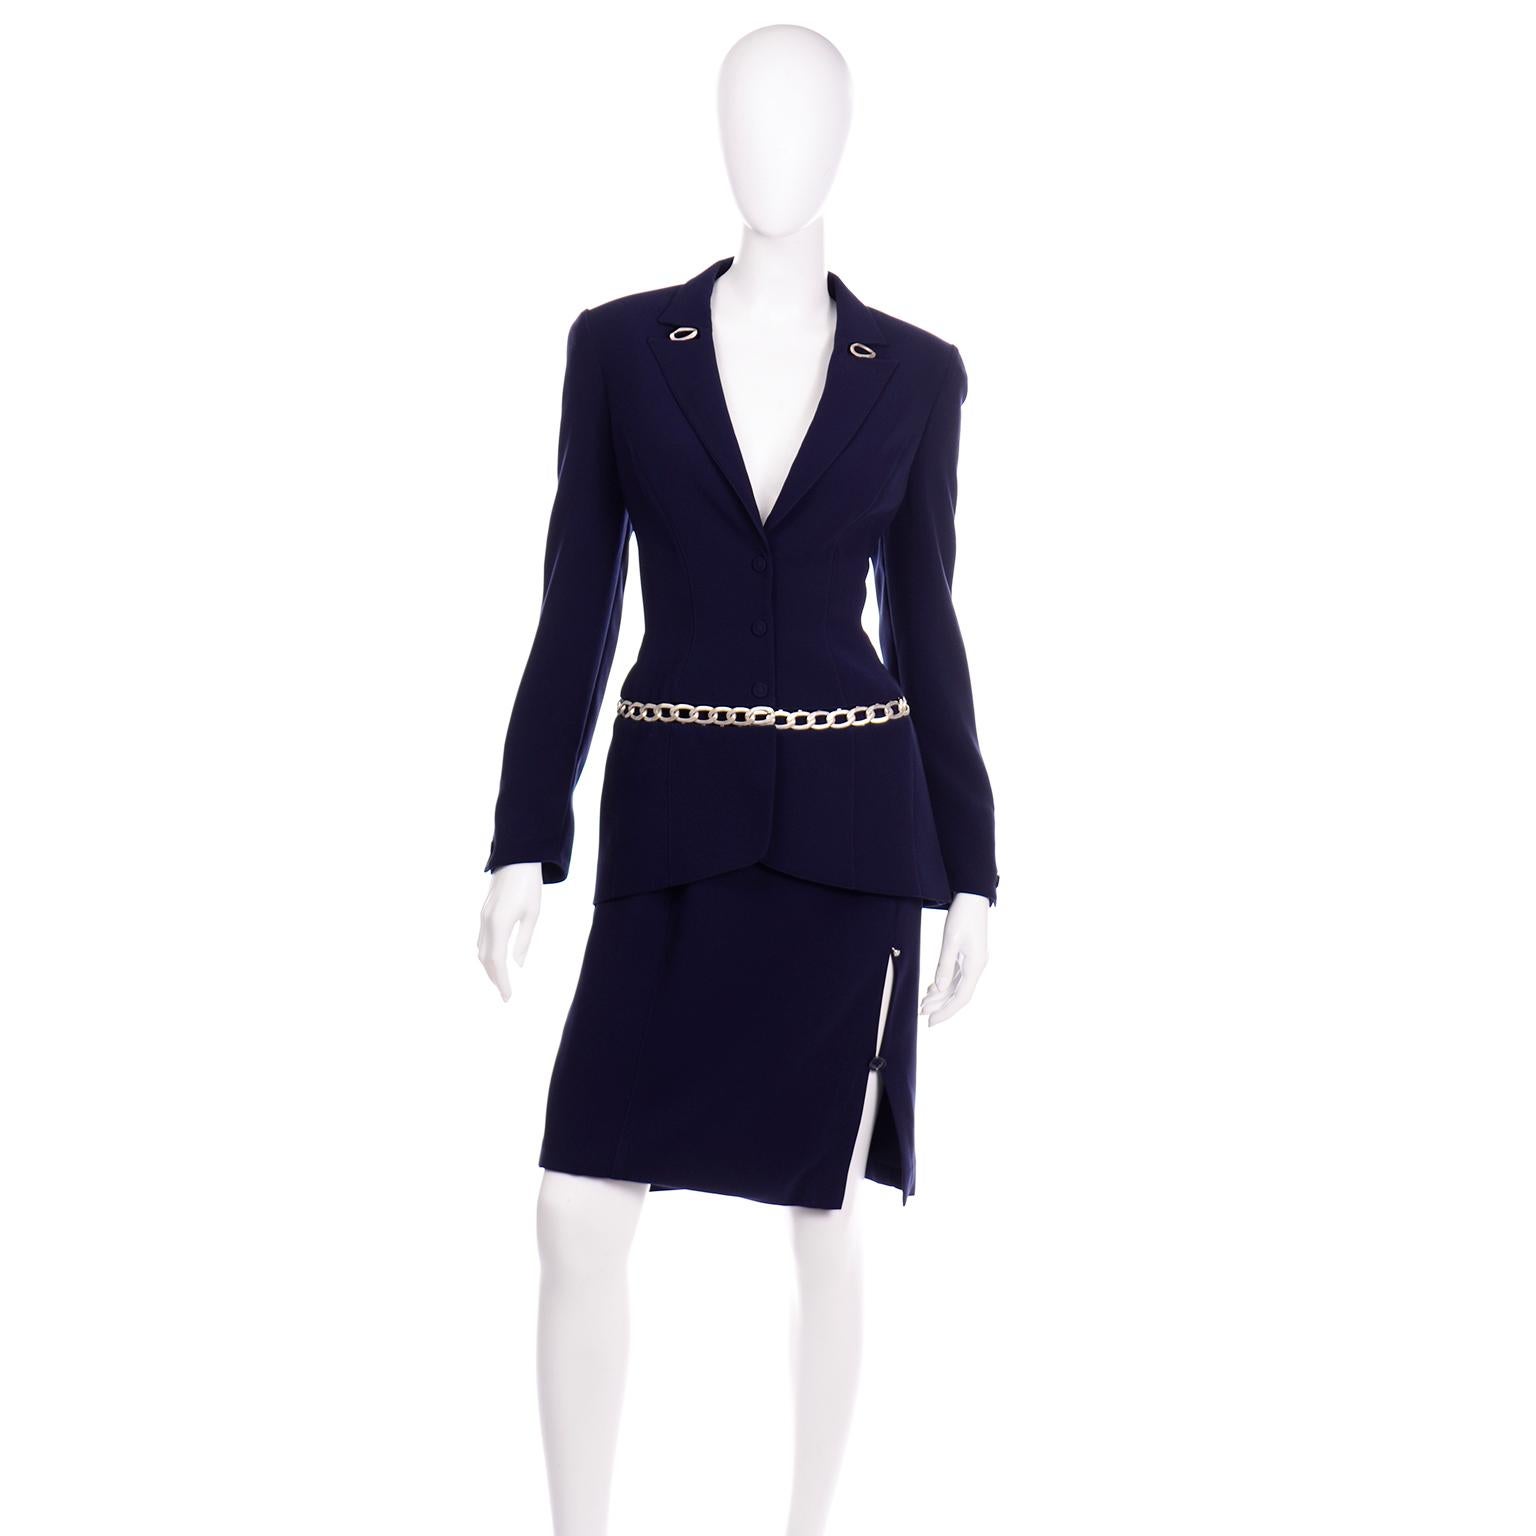 This is such an incredible Thierry Mugler navy skirt suit in with a  matte silver-tone chain link detail. The jacket has fabric covered metal snap buttons in the center front opening and shoulder pads for structure. In classic Thierry Mugler